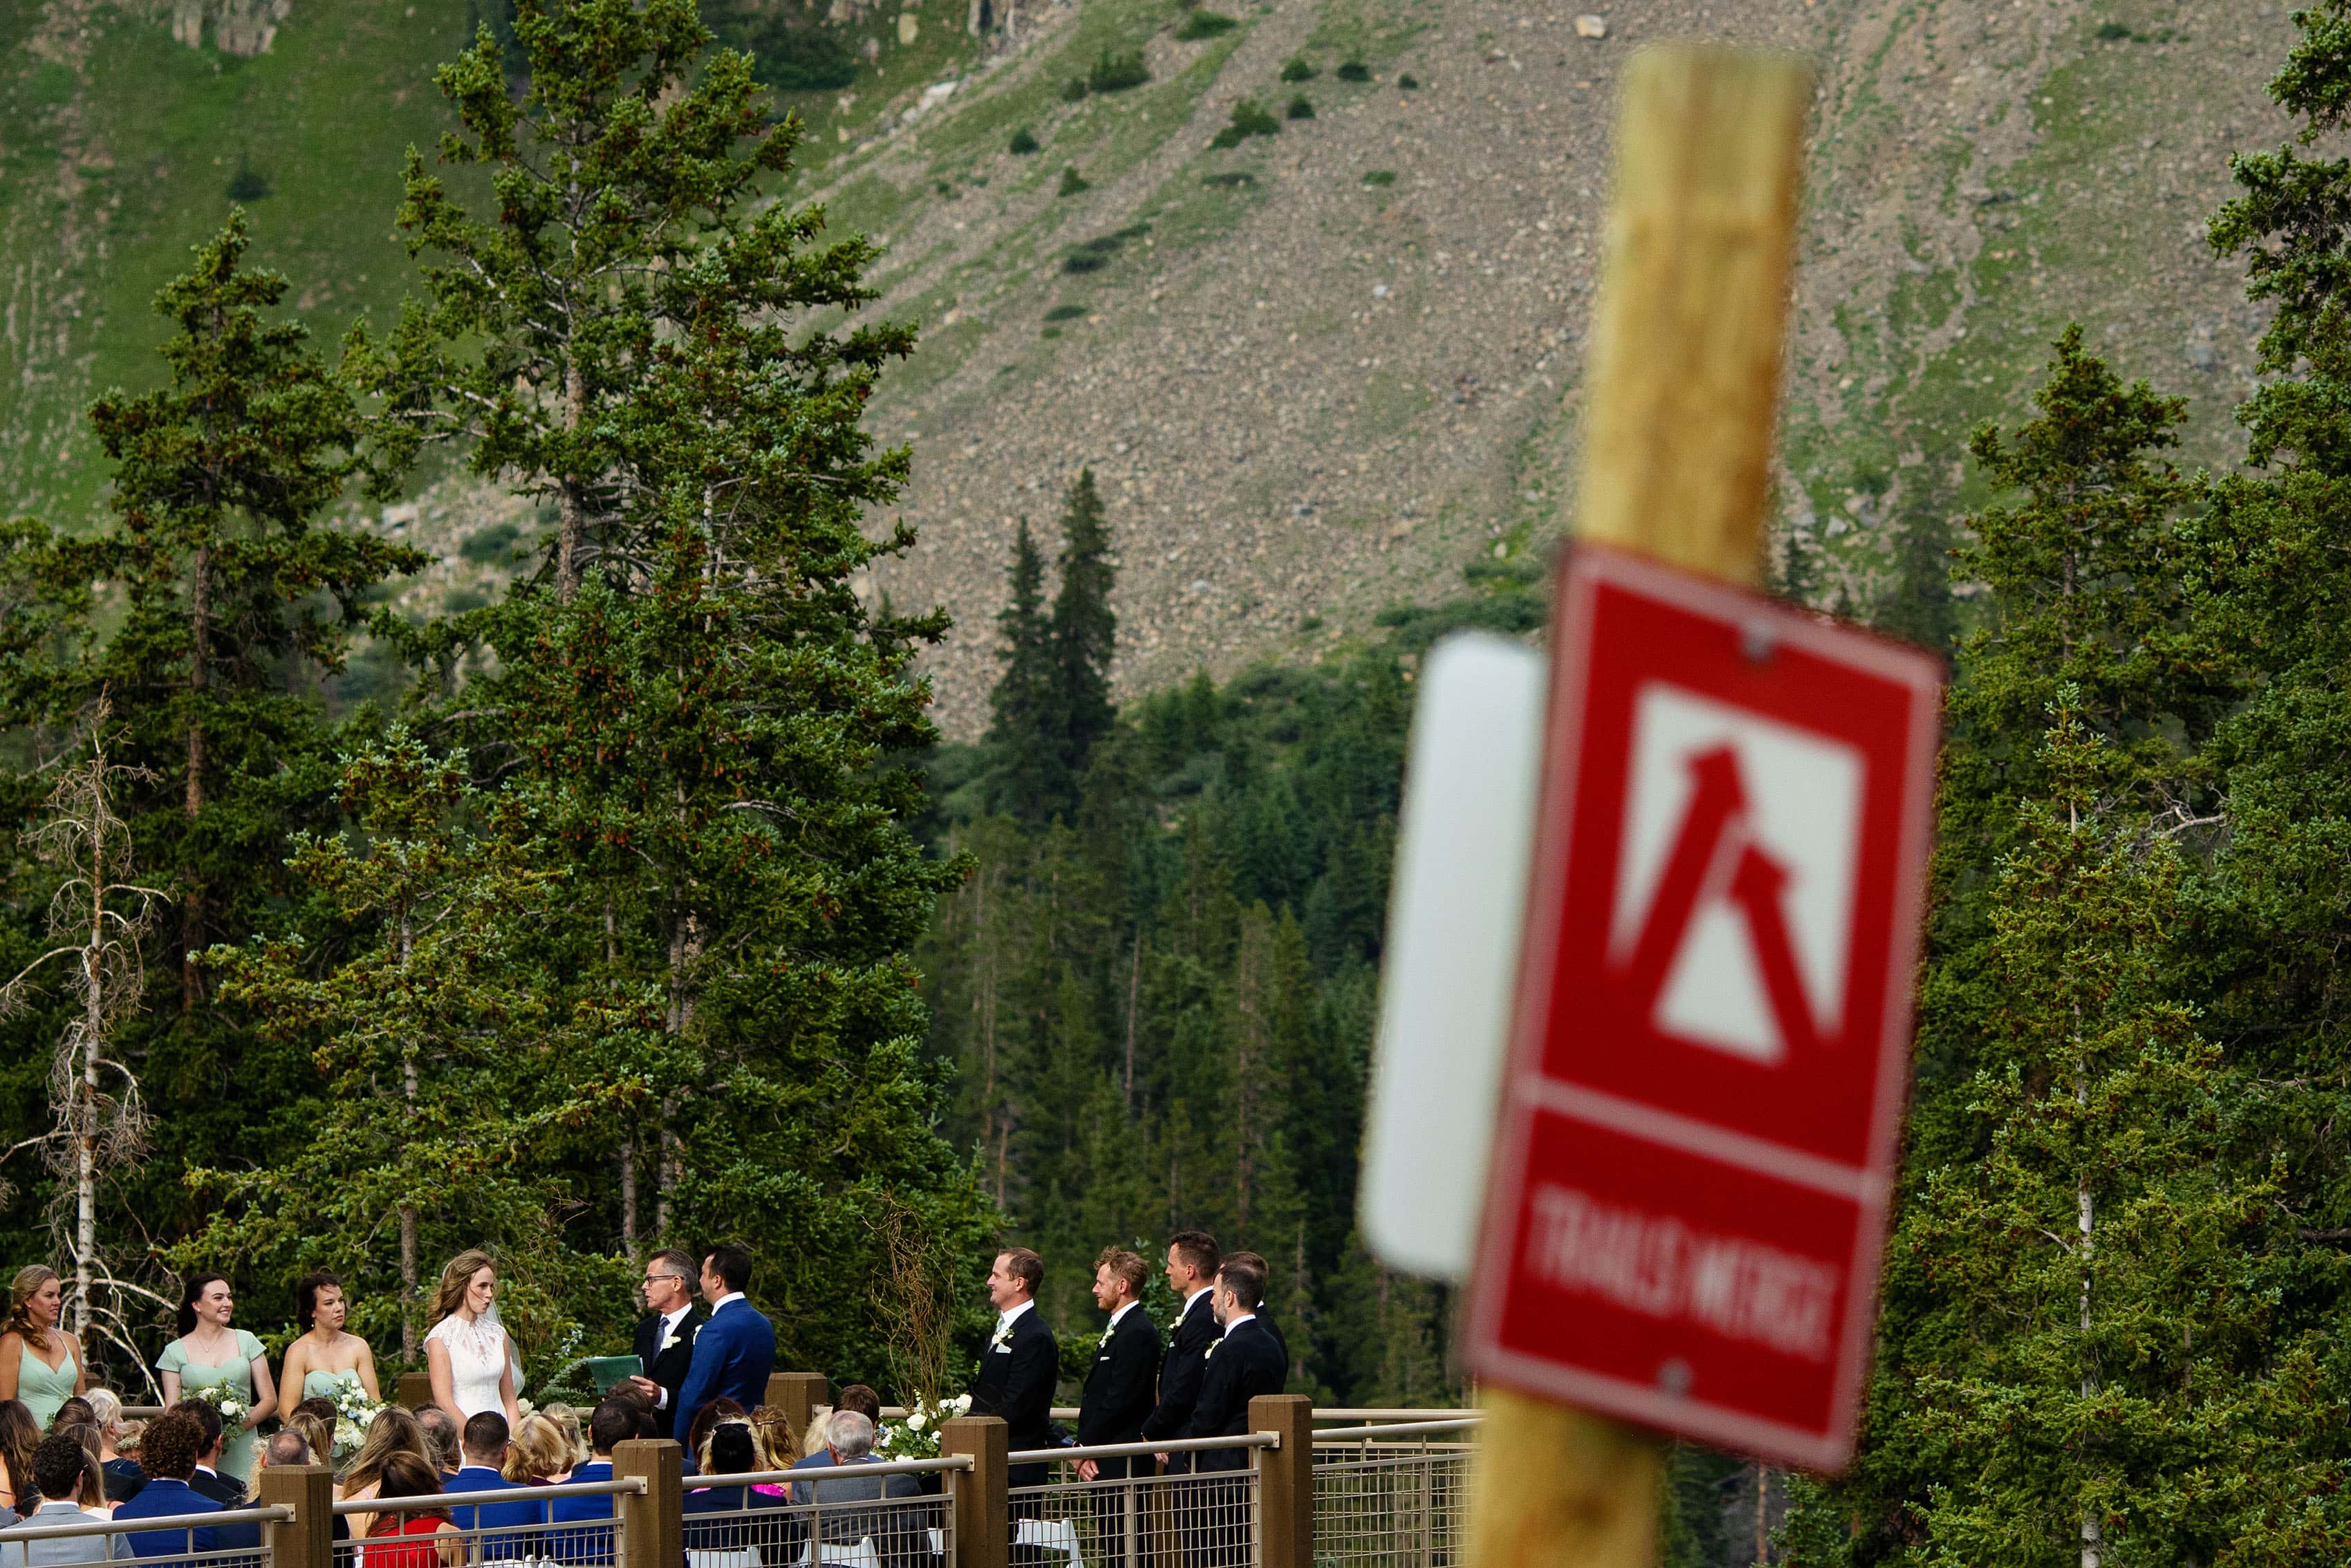 A trails merge sign near the wedding ceremony